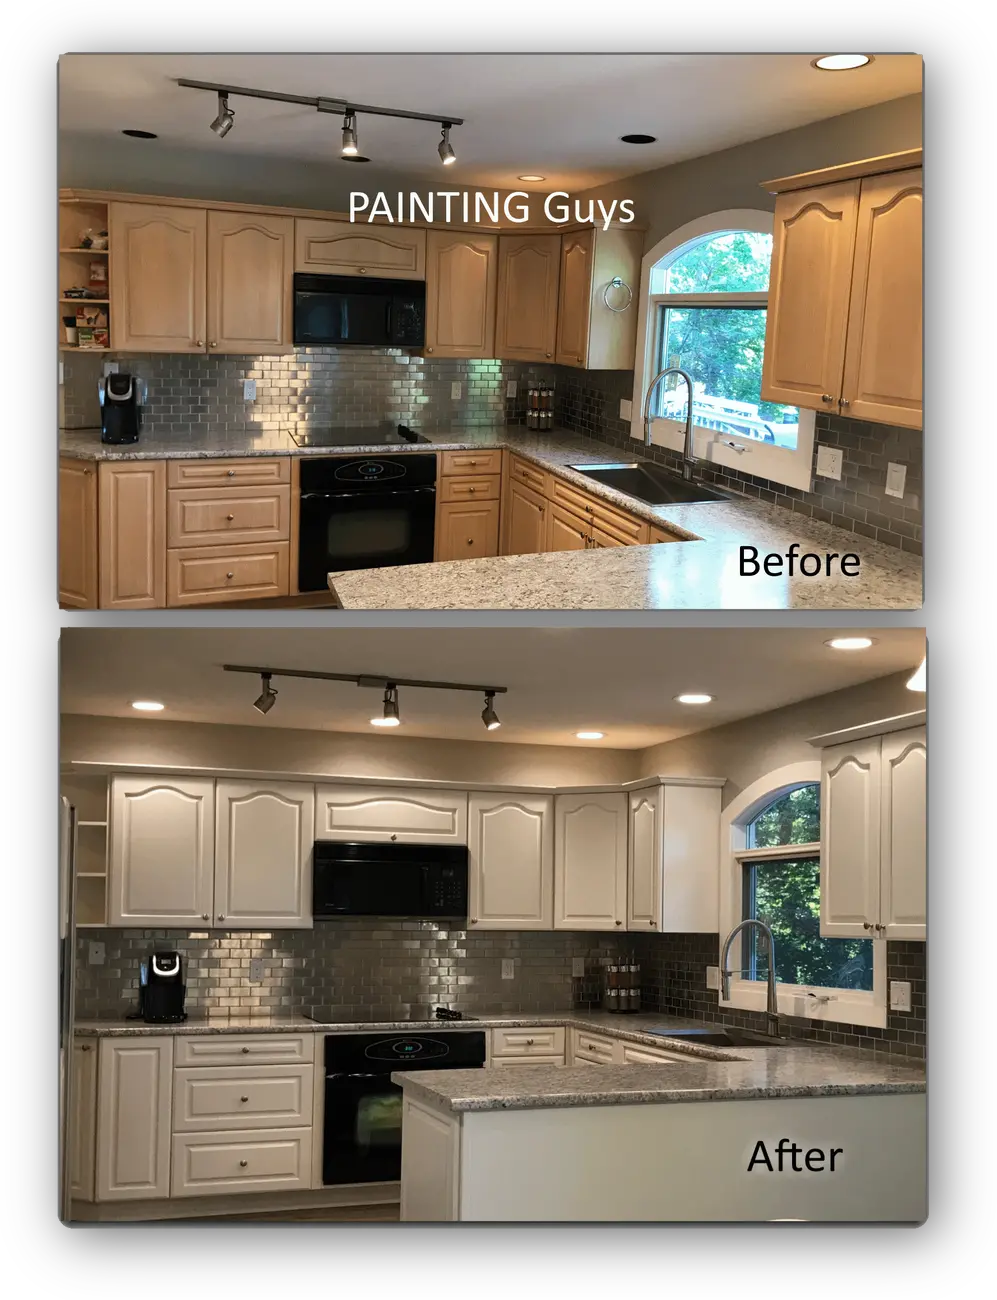 Real Estate Agents Suggest Kitchen Cabinet Painting